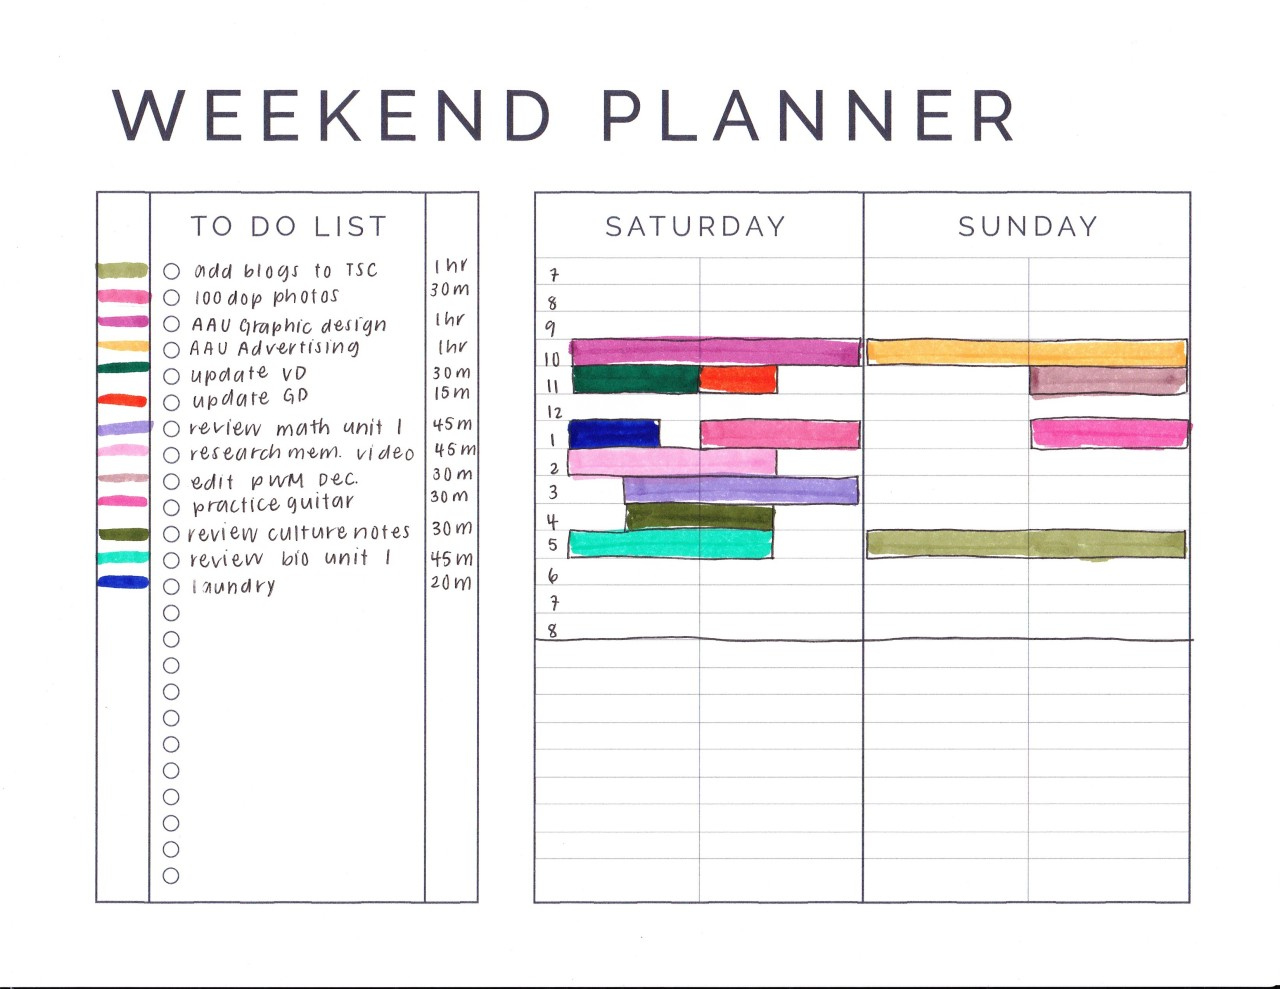 Wingardium Leviosa Weekend Planner Printable How To Use First Write 